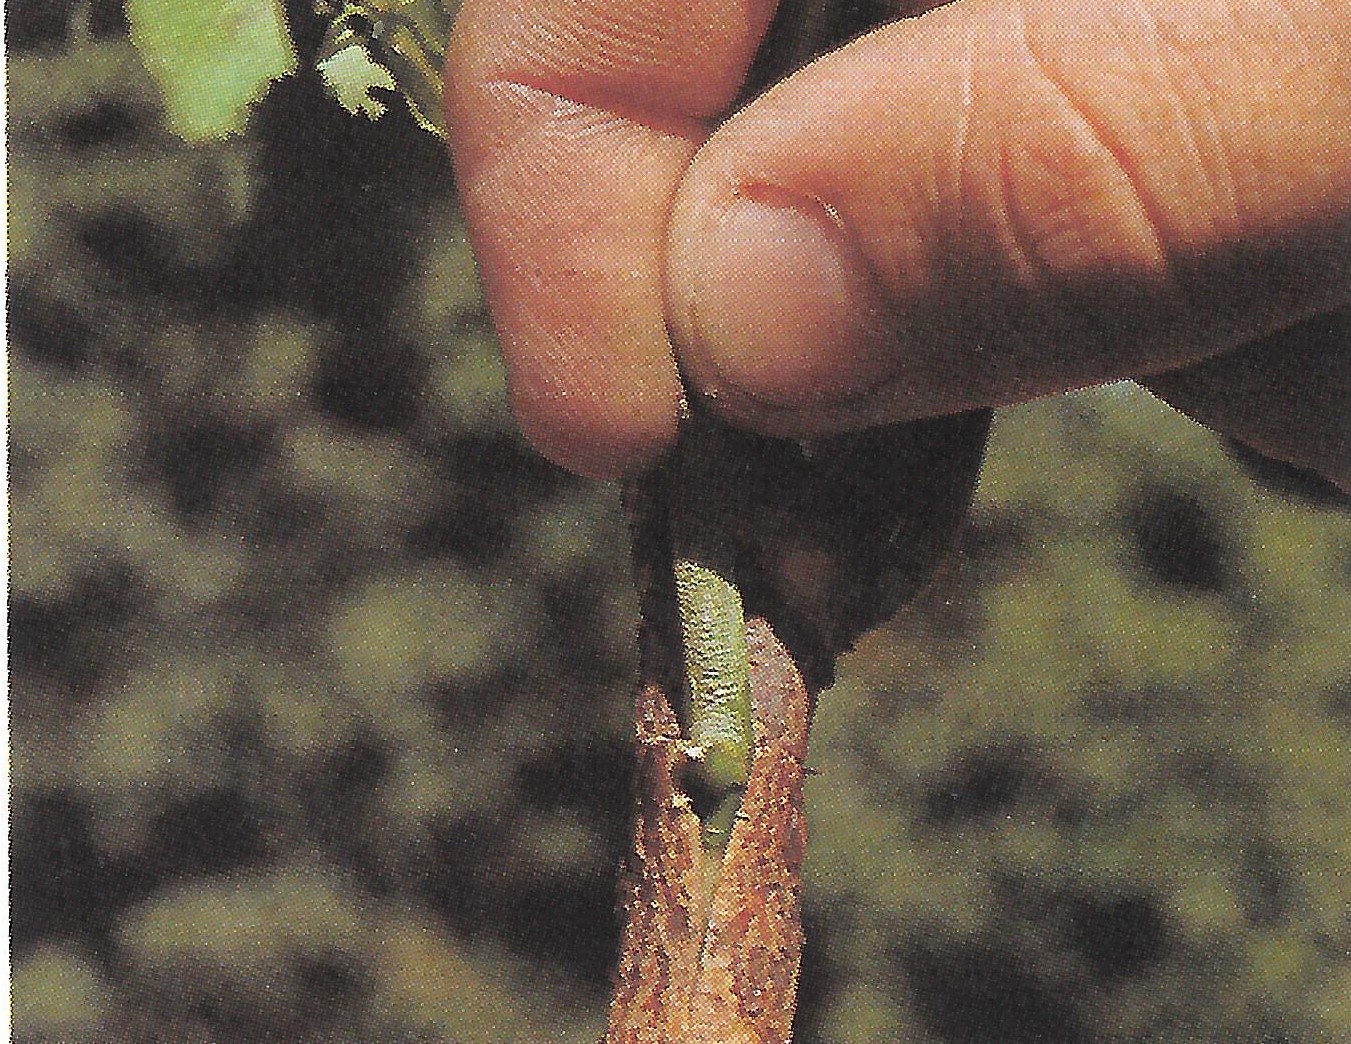 Step 6: Now push the bud into the T-slit so that the bark holds it in position.